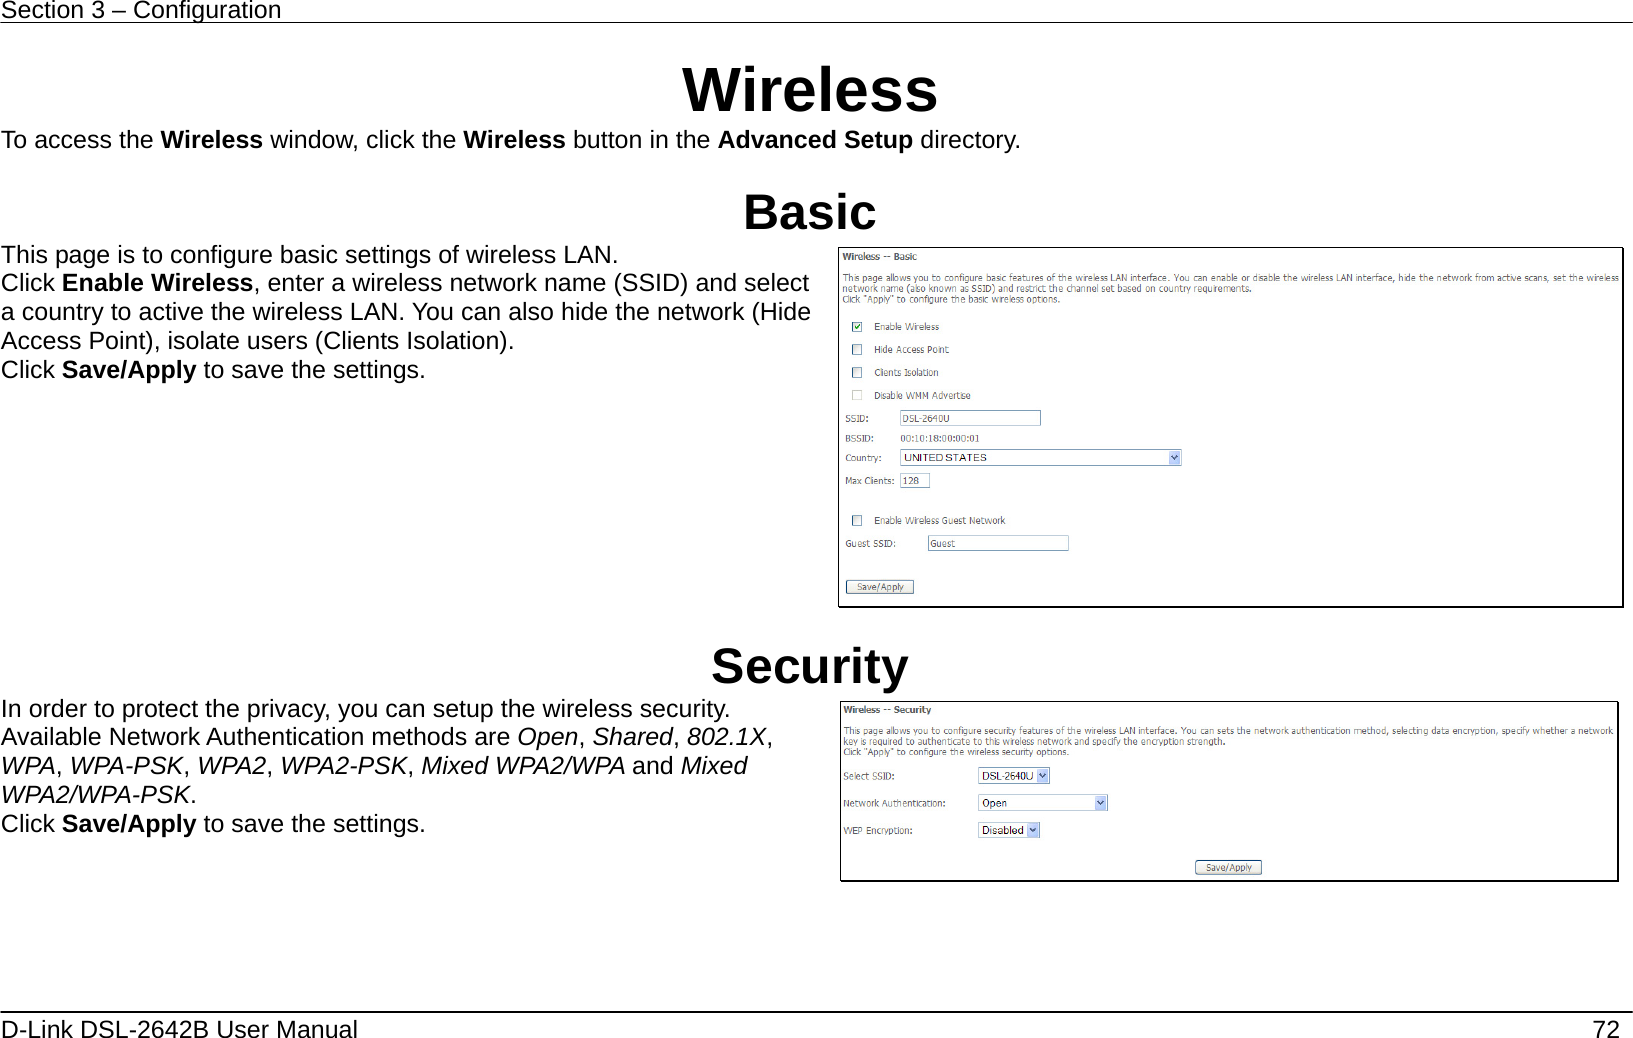 Section 3 – Configuration   D-Link DSL-2642B User Manual    72 Wireless To access the Wireless window, click the Wireless button in the Advanced Setup directory.  Basic This page is to configure basic settings of wireless LAN. Click Enable Wireless, enter a wireless network name (SSID) and select a country to active the wireless LAN. You can also hide the network (Hide Access Point), isolate users (Clients Isolation). Click Save/Apply to save the settings.    Security In order to protect the privacy, you can setup the wireless security. Available Network Authentication methods are Open, Shared, 802.1X, WPA, WPA-PSK, WPA2, WPA2-PSK, Mixed WPA2/WPA and Mixed WPA2/WPA-PSK. Click Save/Apply to save the settings.      